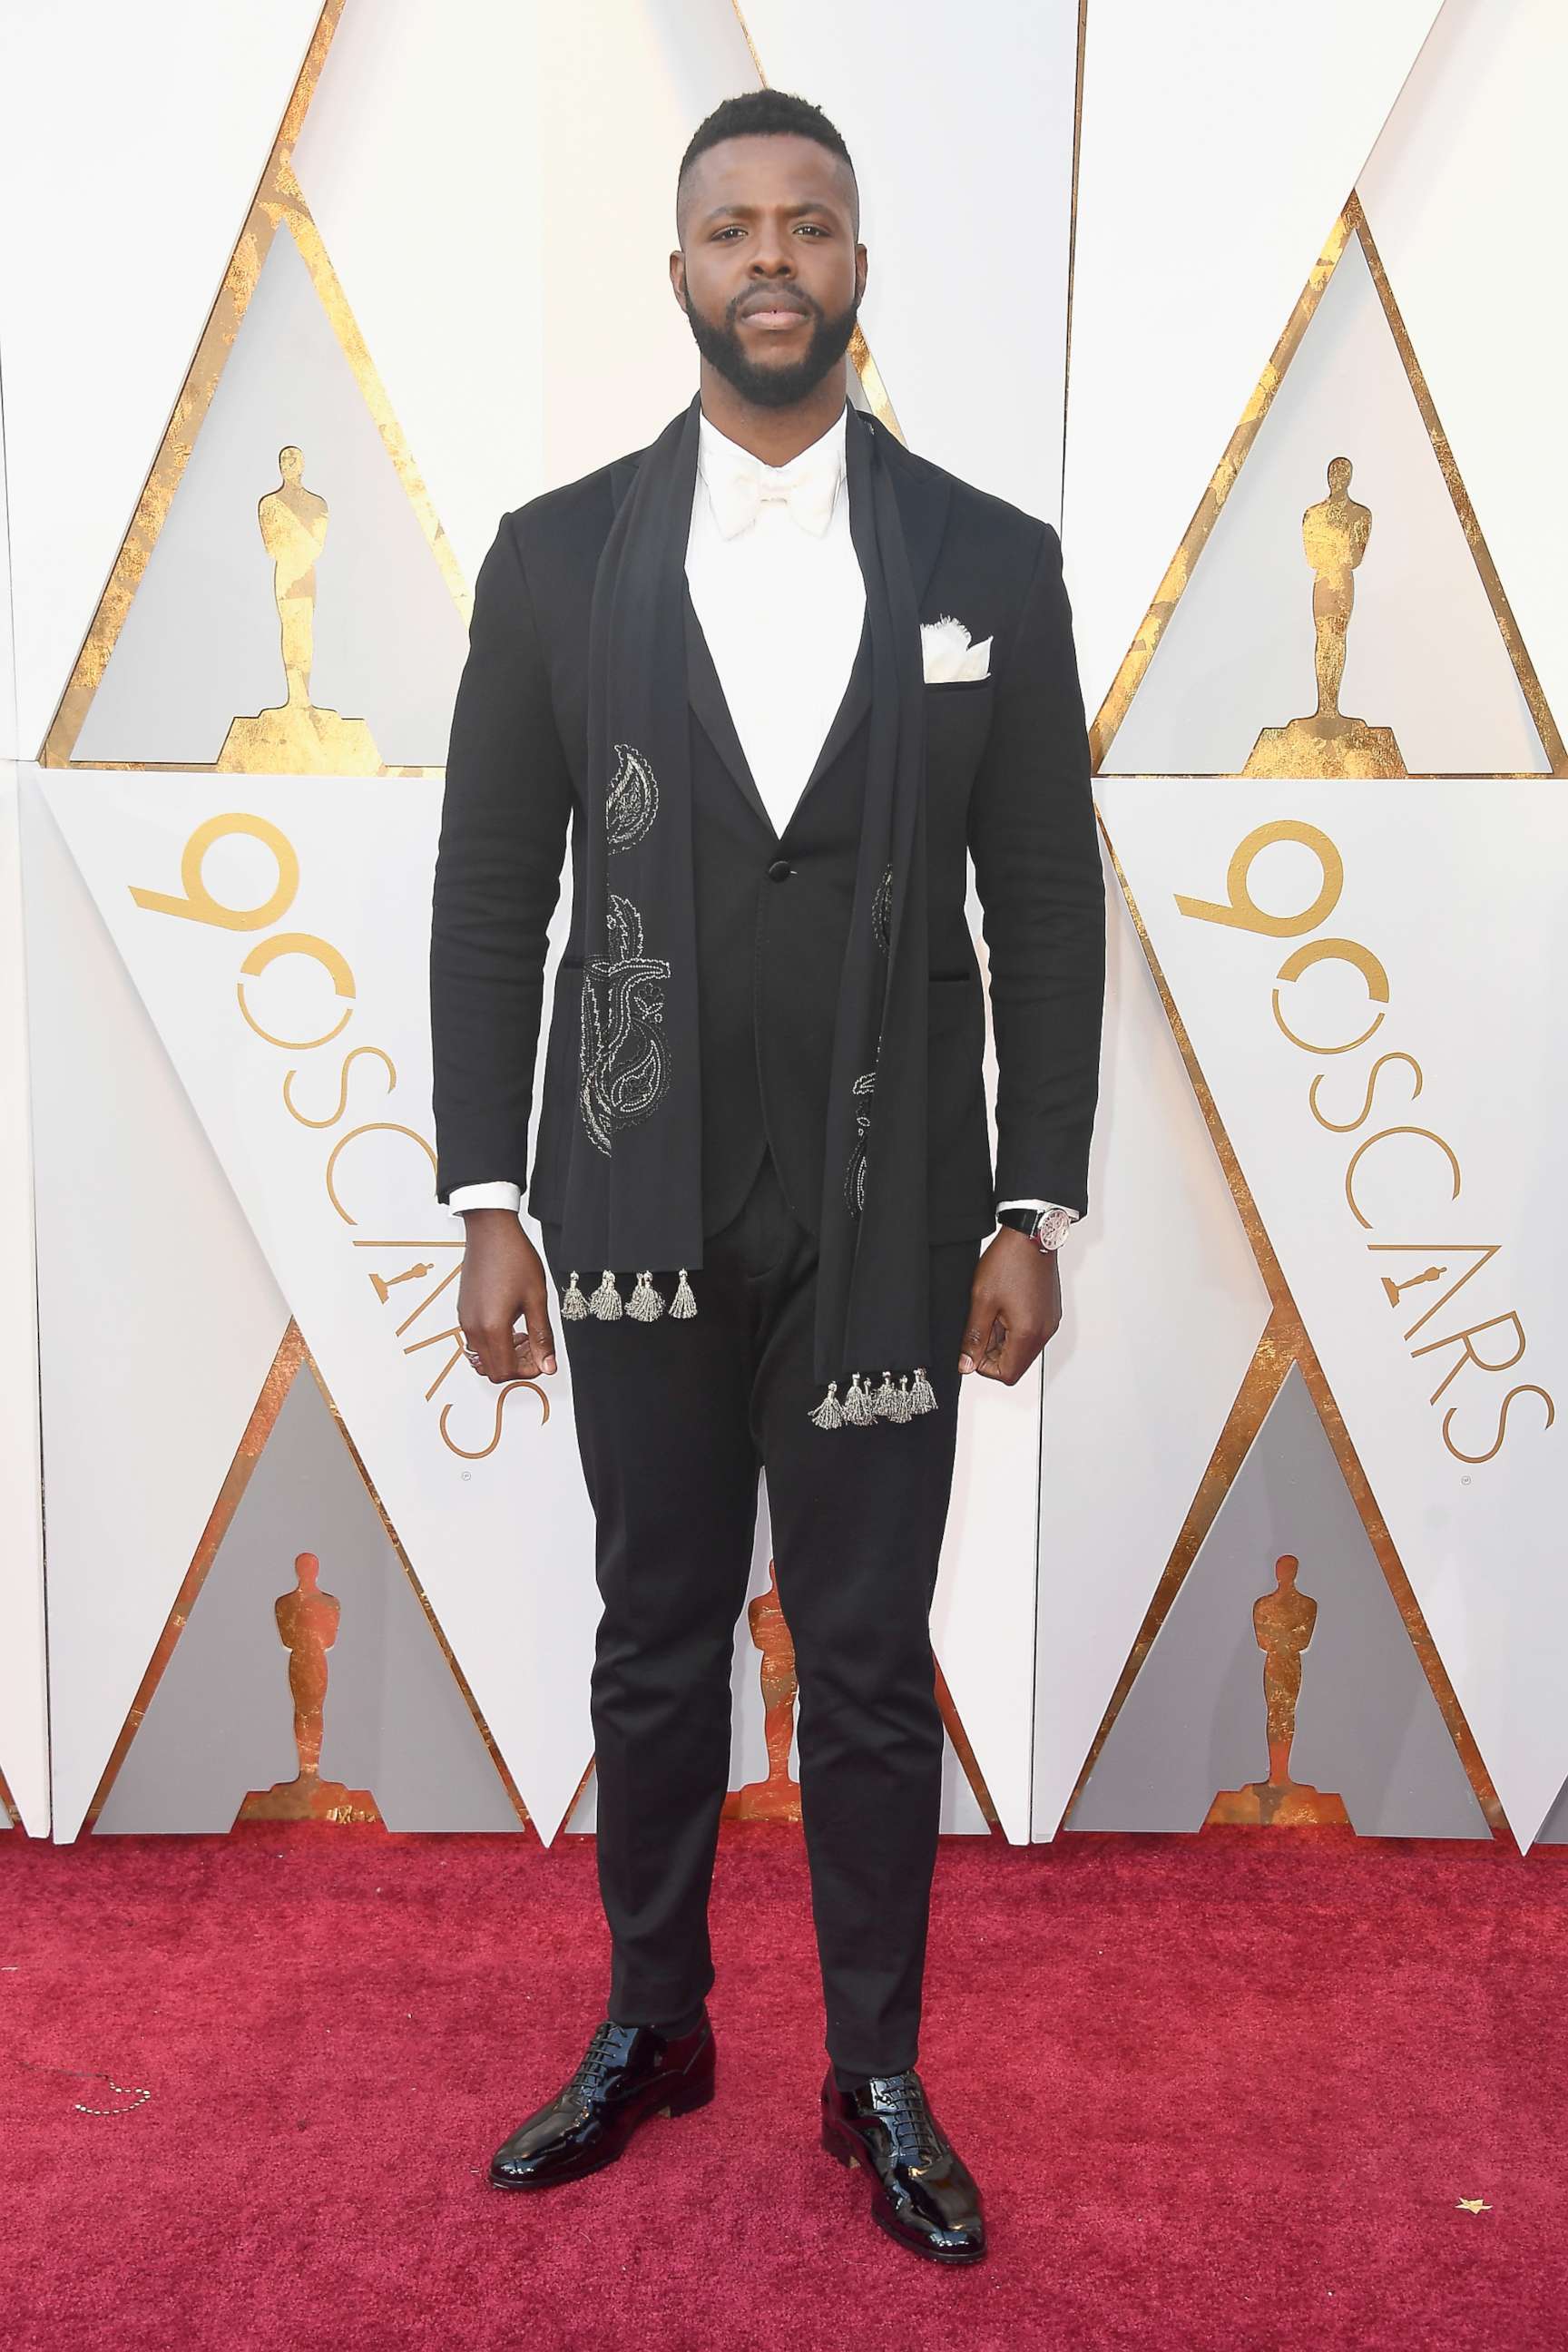 PHOTO: Winston Duke attends the 90th Annual Academy Awards at Hollywood & Highland Center, March 4, 2018 in Hollywood, Calif.